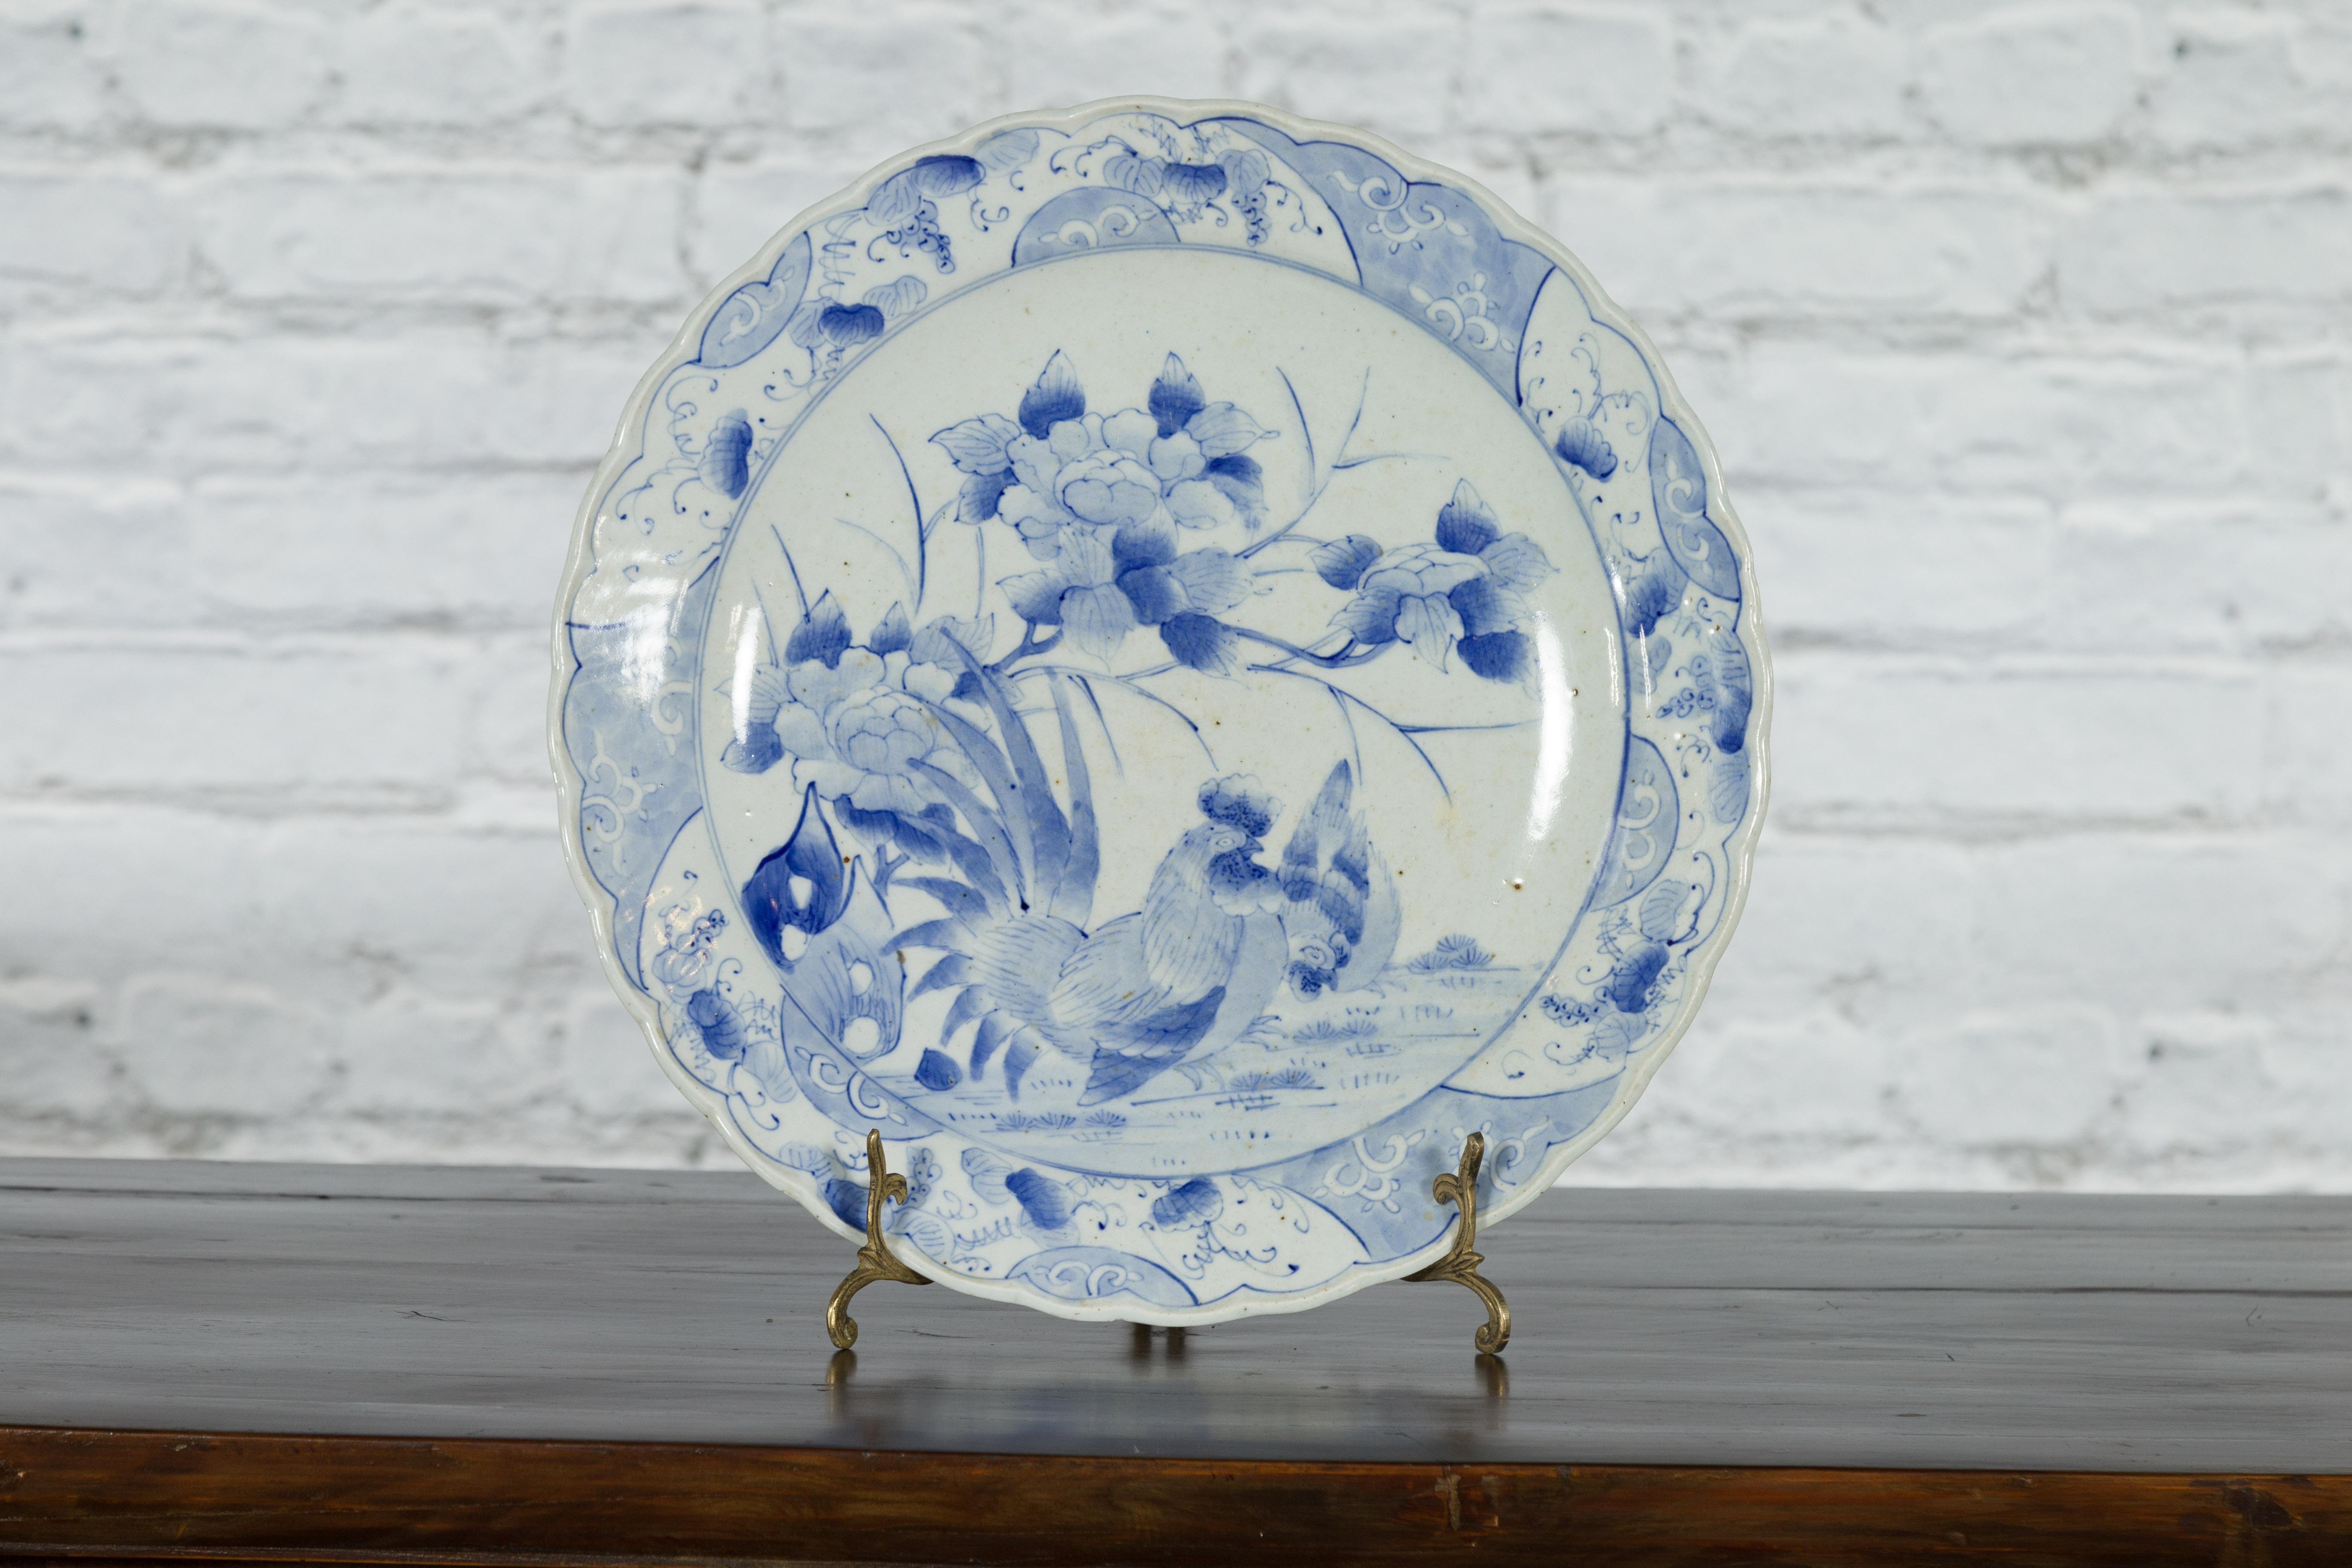 A Japanese porcelain plate from the 19th century, with hand-painted blue and white floral décor with a rooster and a hen. Created in Japan during the 19th century, this porcelain plate features a delicate blue and white décor depicting a peaceful